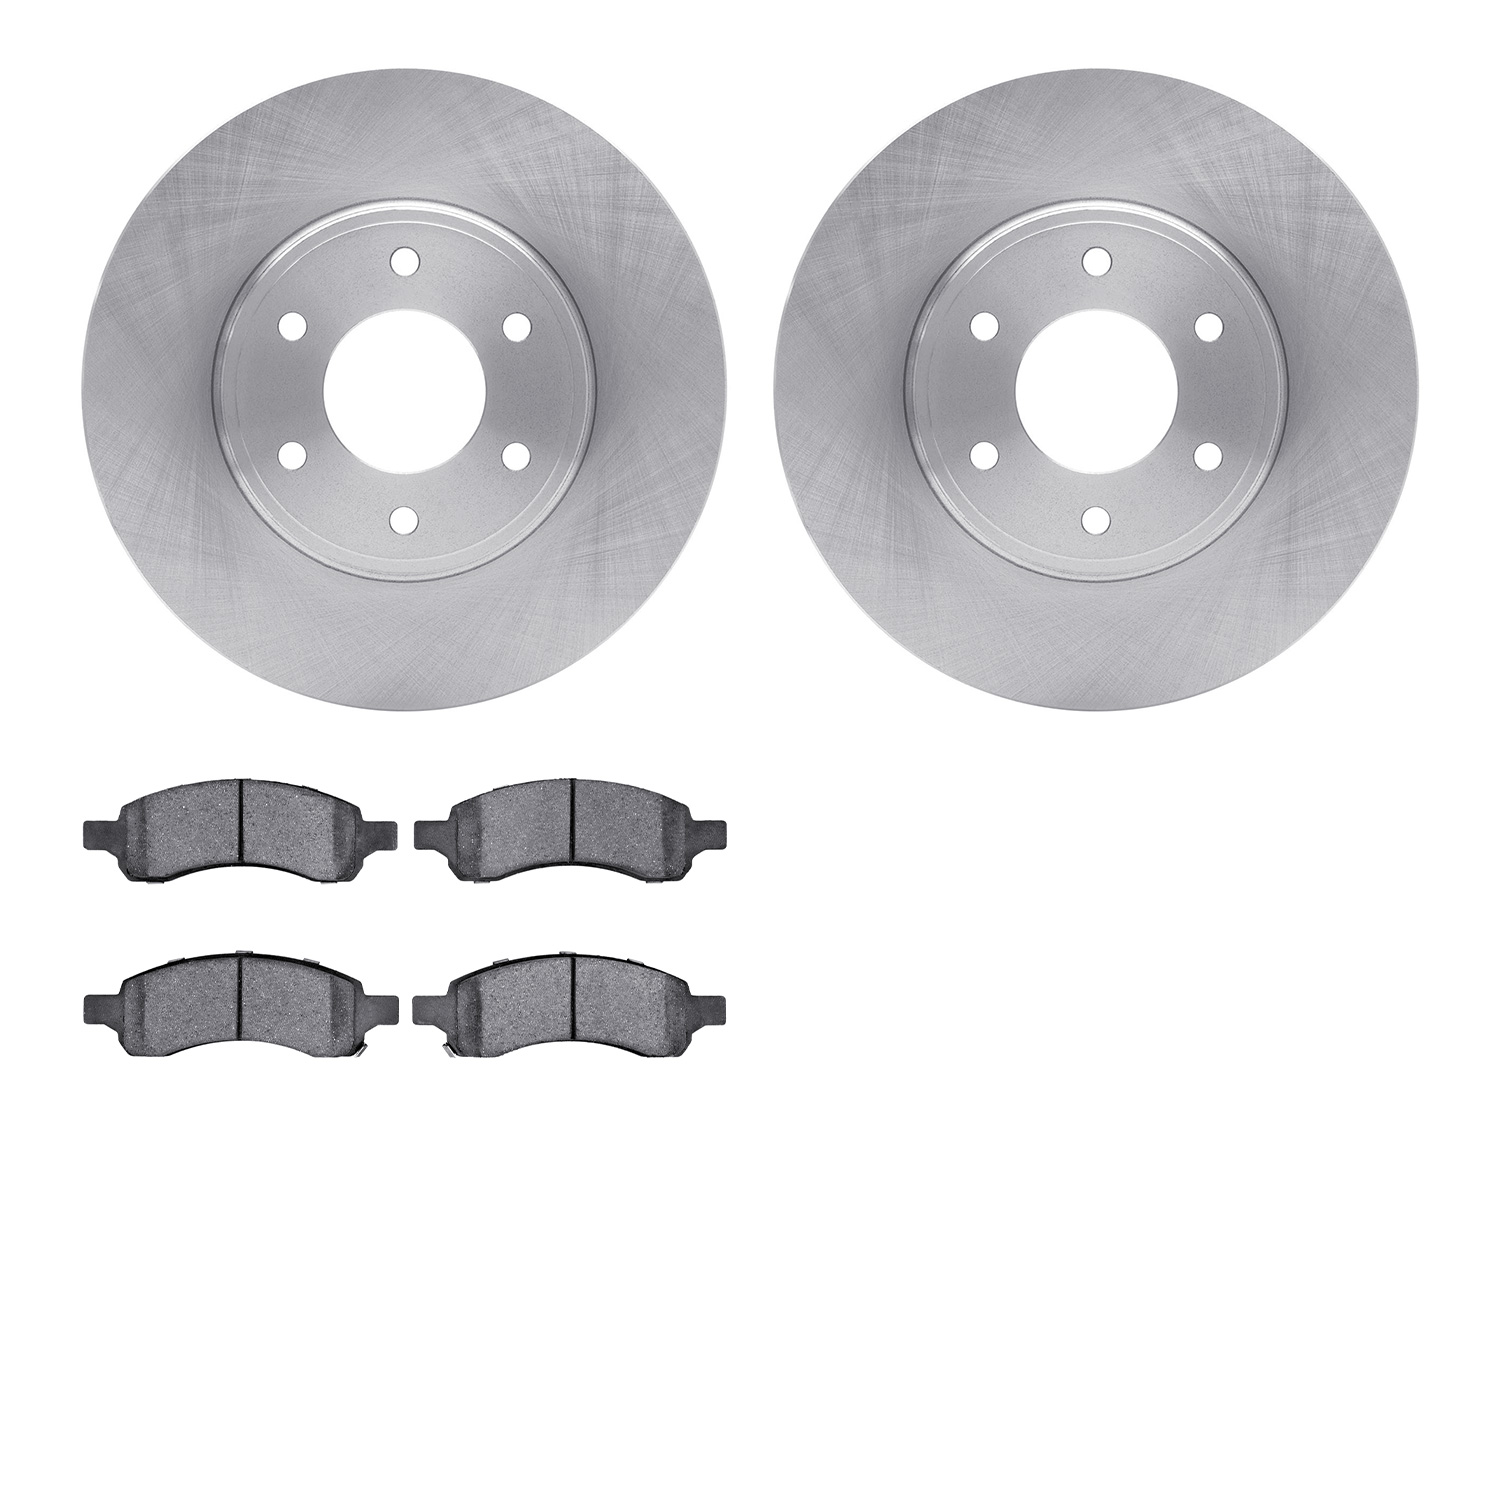 6402-47040 Brake Rotors with Ultimate-Duty Brake Pads, 2006-2009 GM, Position: Front